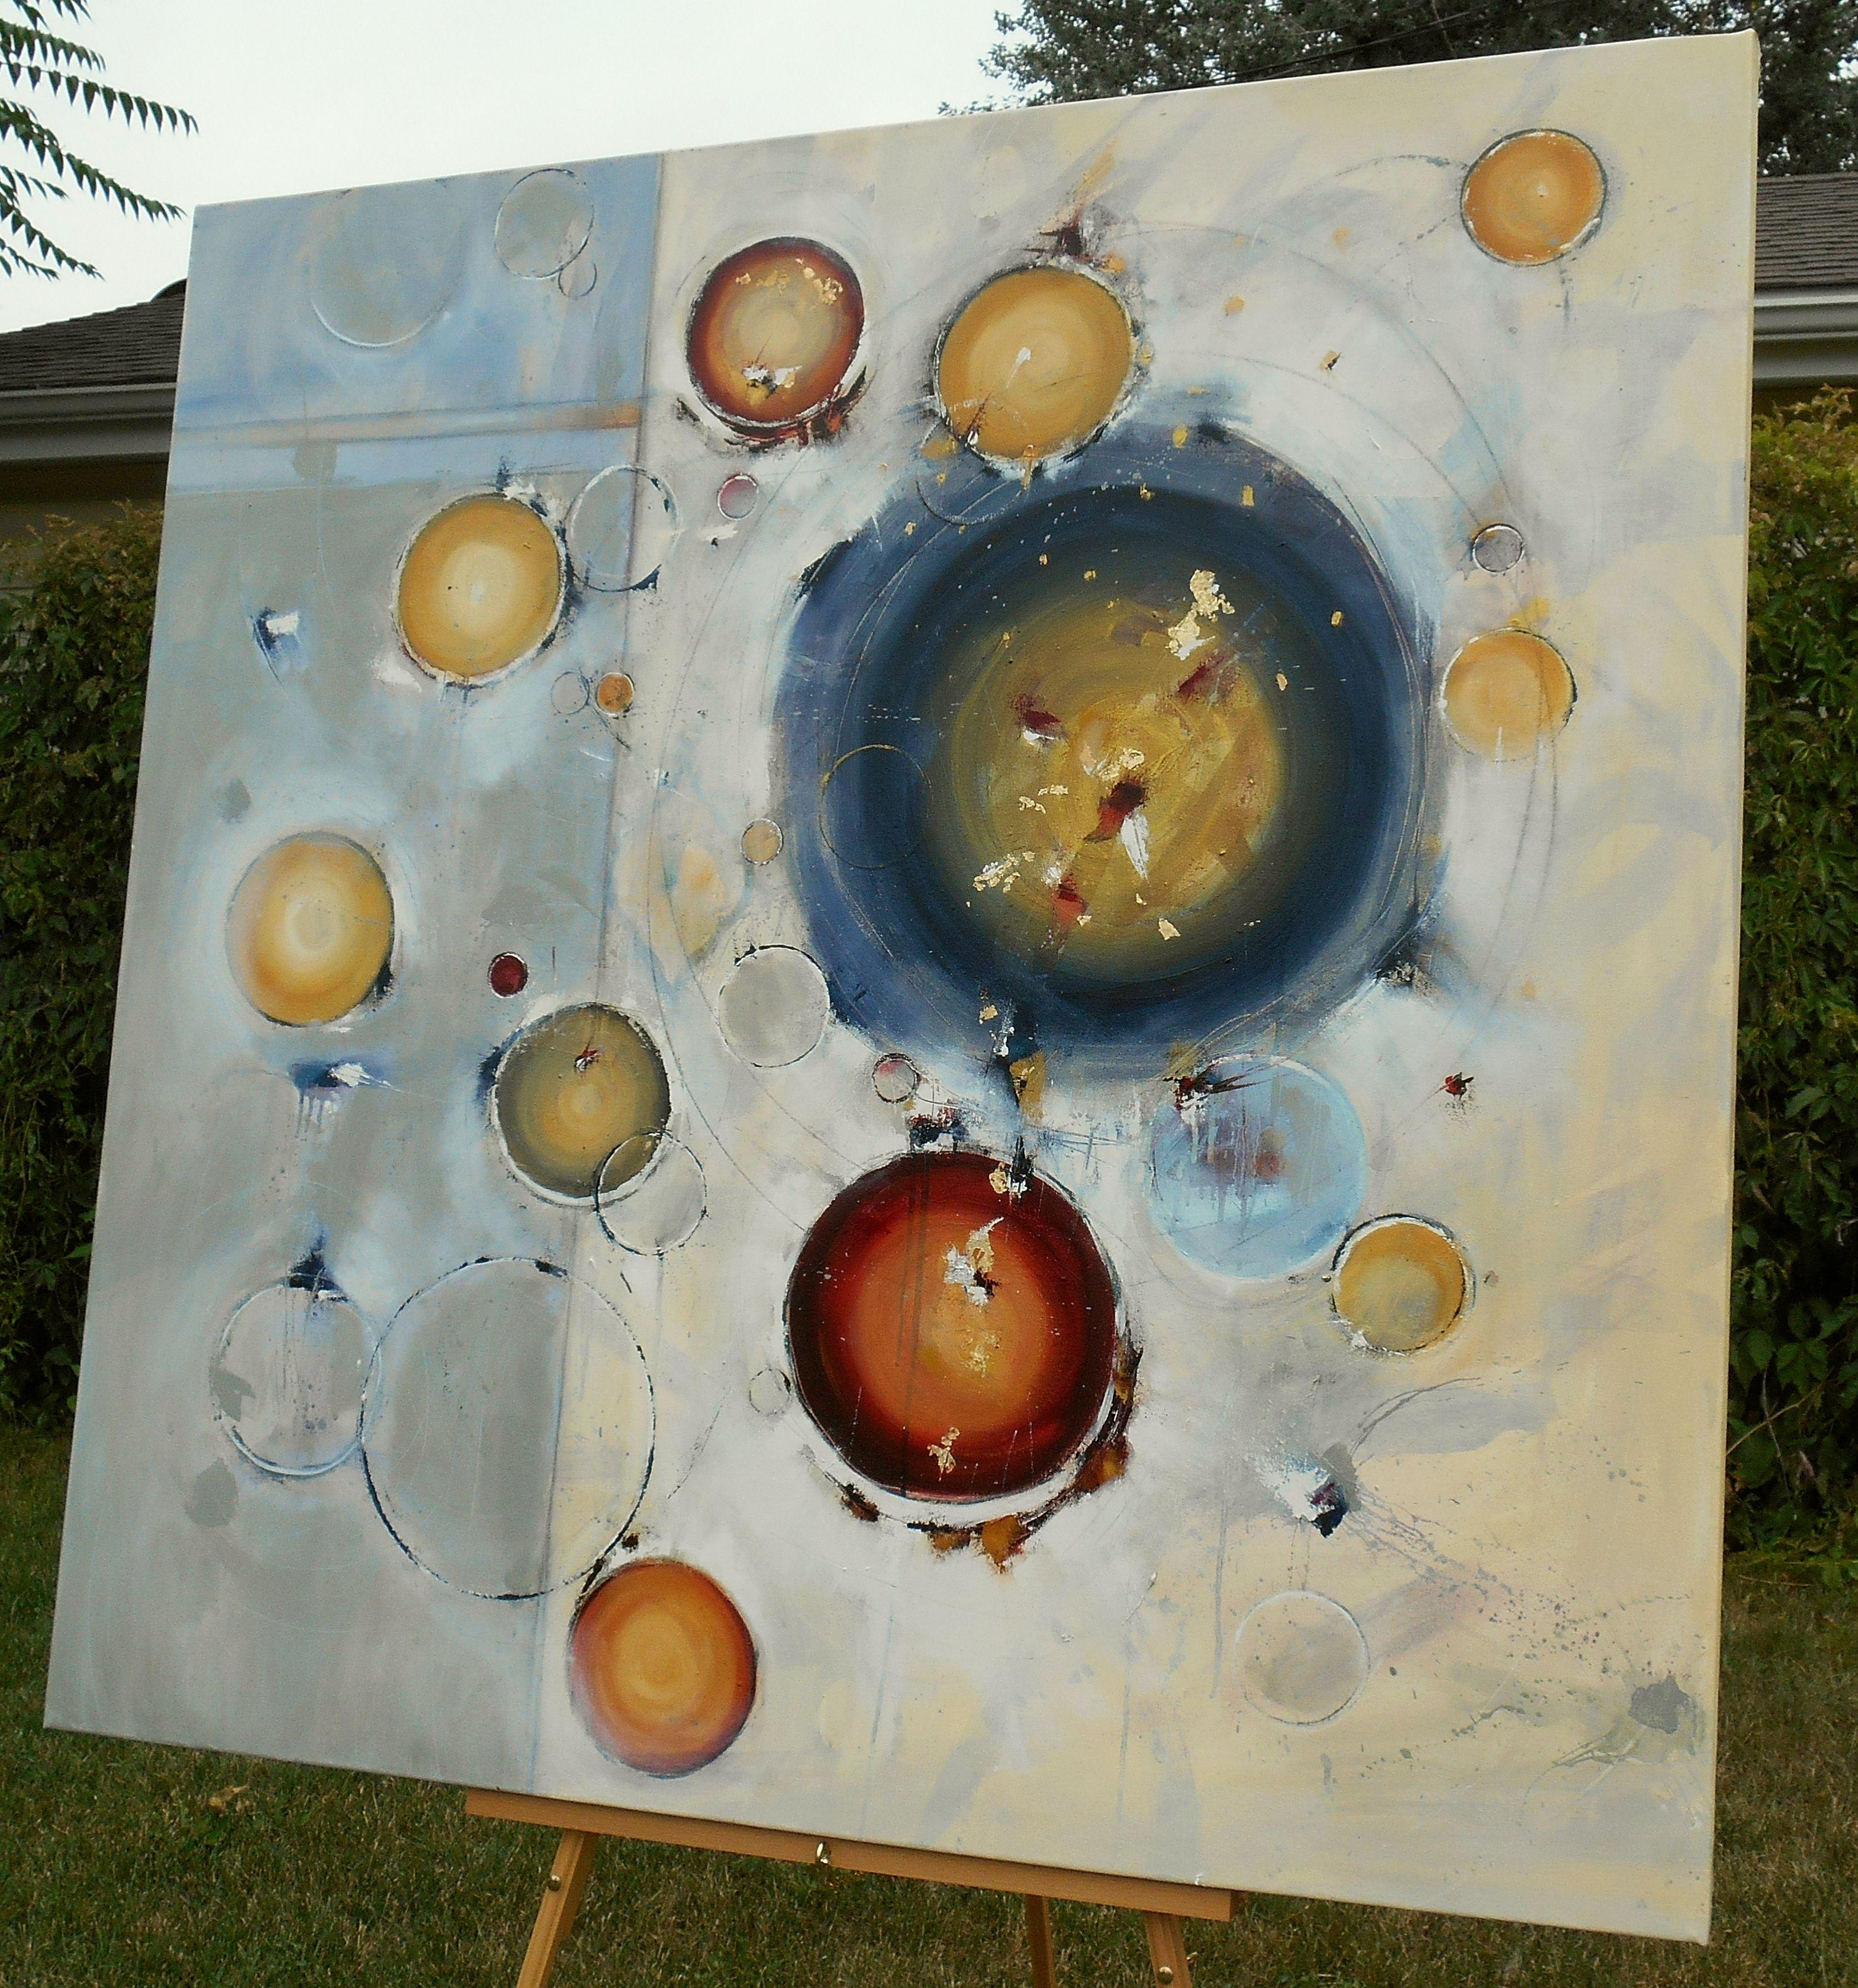 Where The Stars Fall is part of my orb series of paintings, inspired by the idea of 